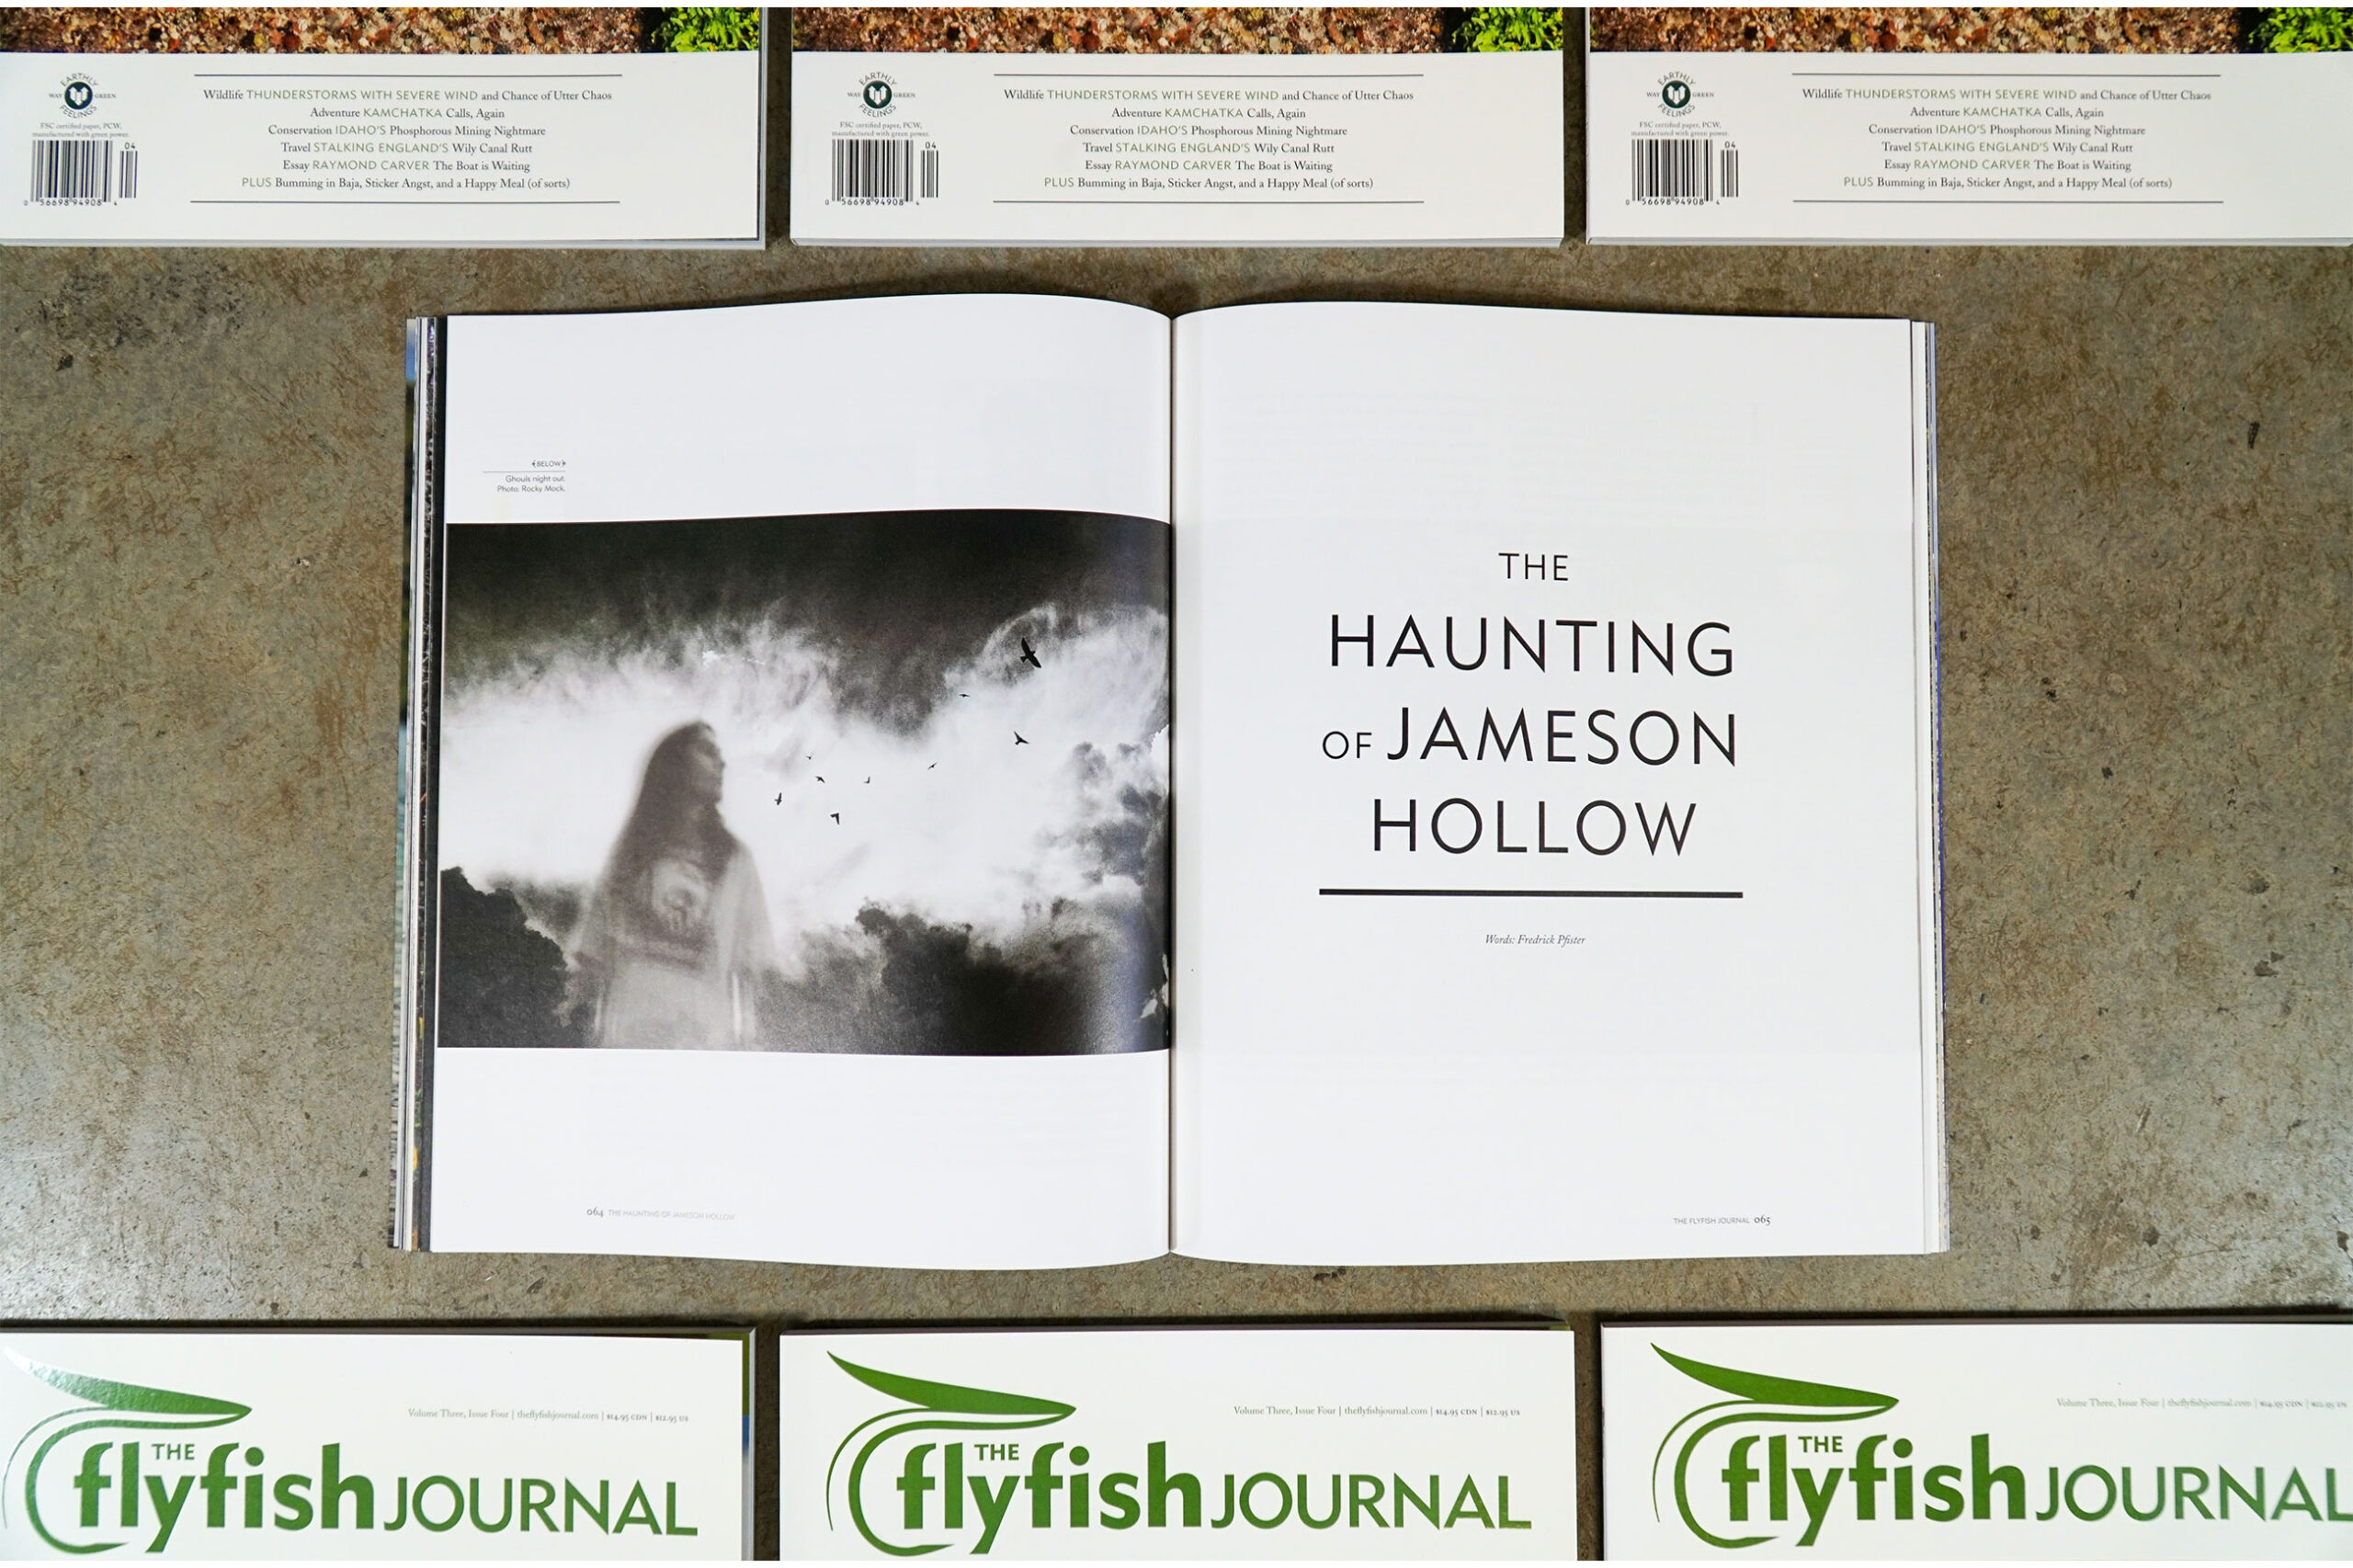 The Flyfish Journal Volume 3 Issue 4 Feature The Haunting of Jamestown Hollow